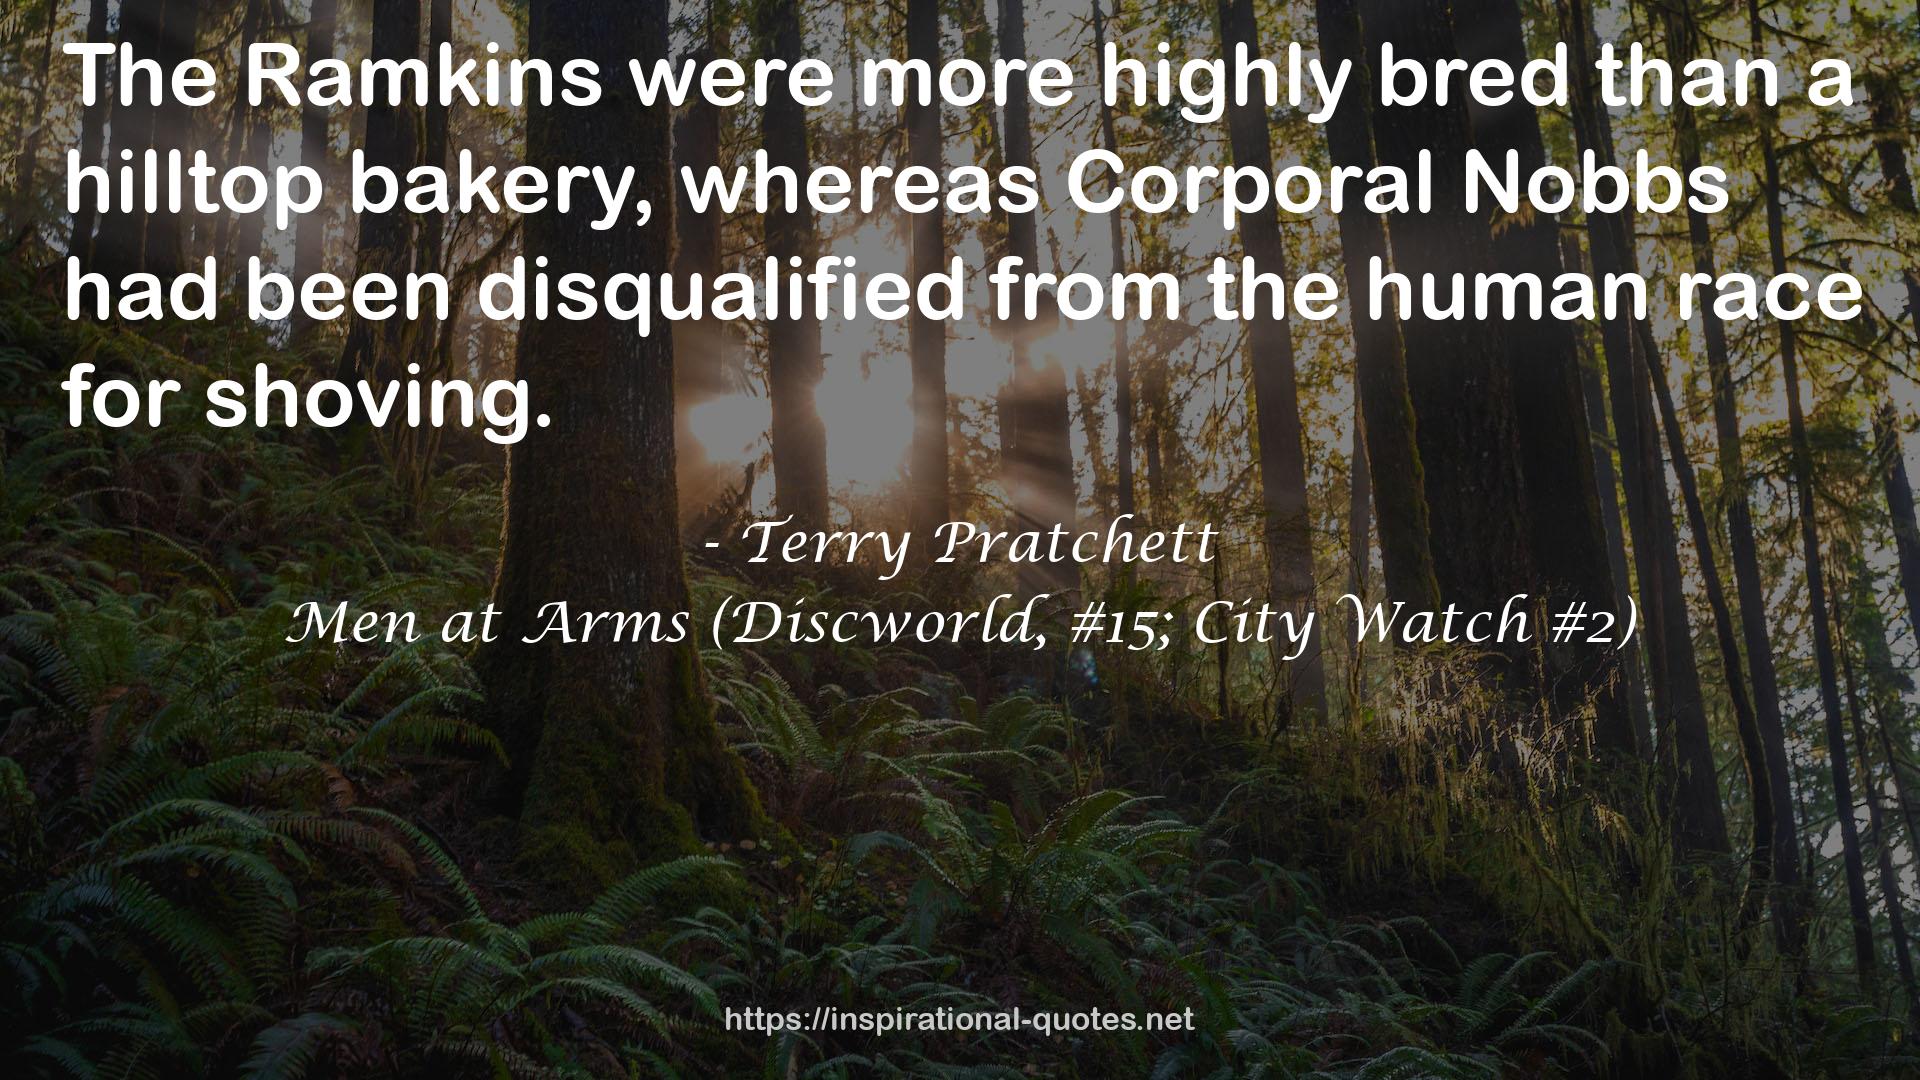 Men at Arms (Discworld, #15; City Watch #2) QUOTES